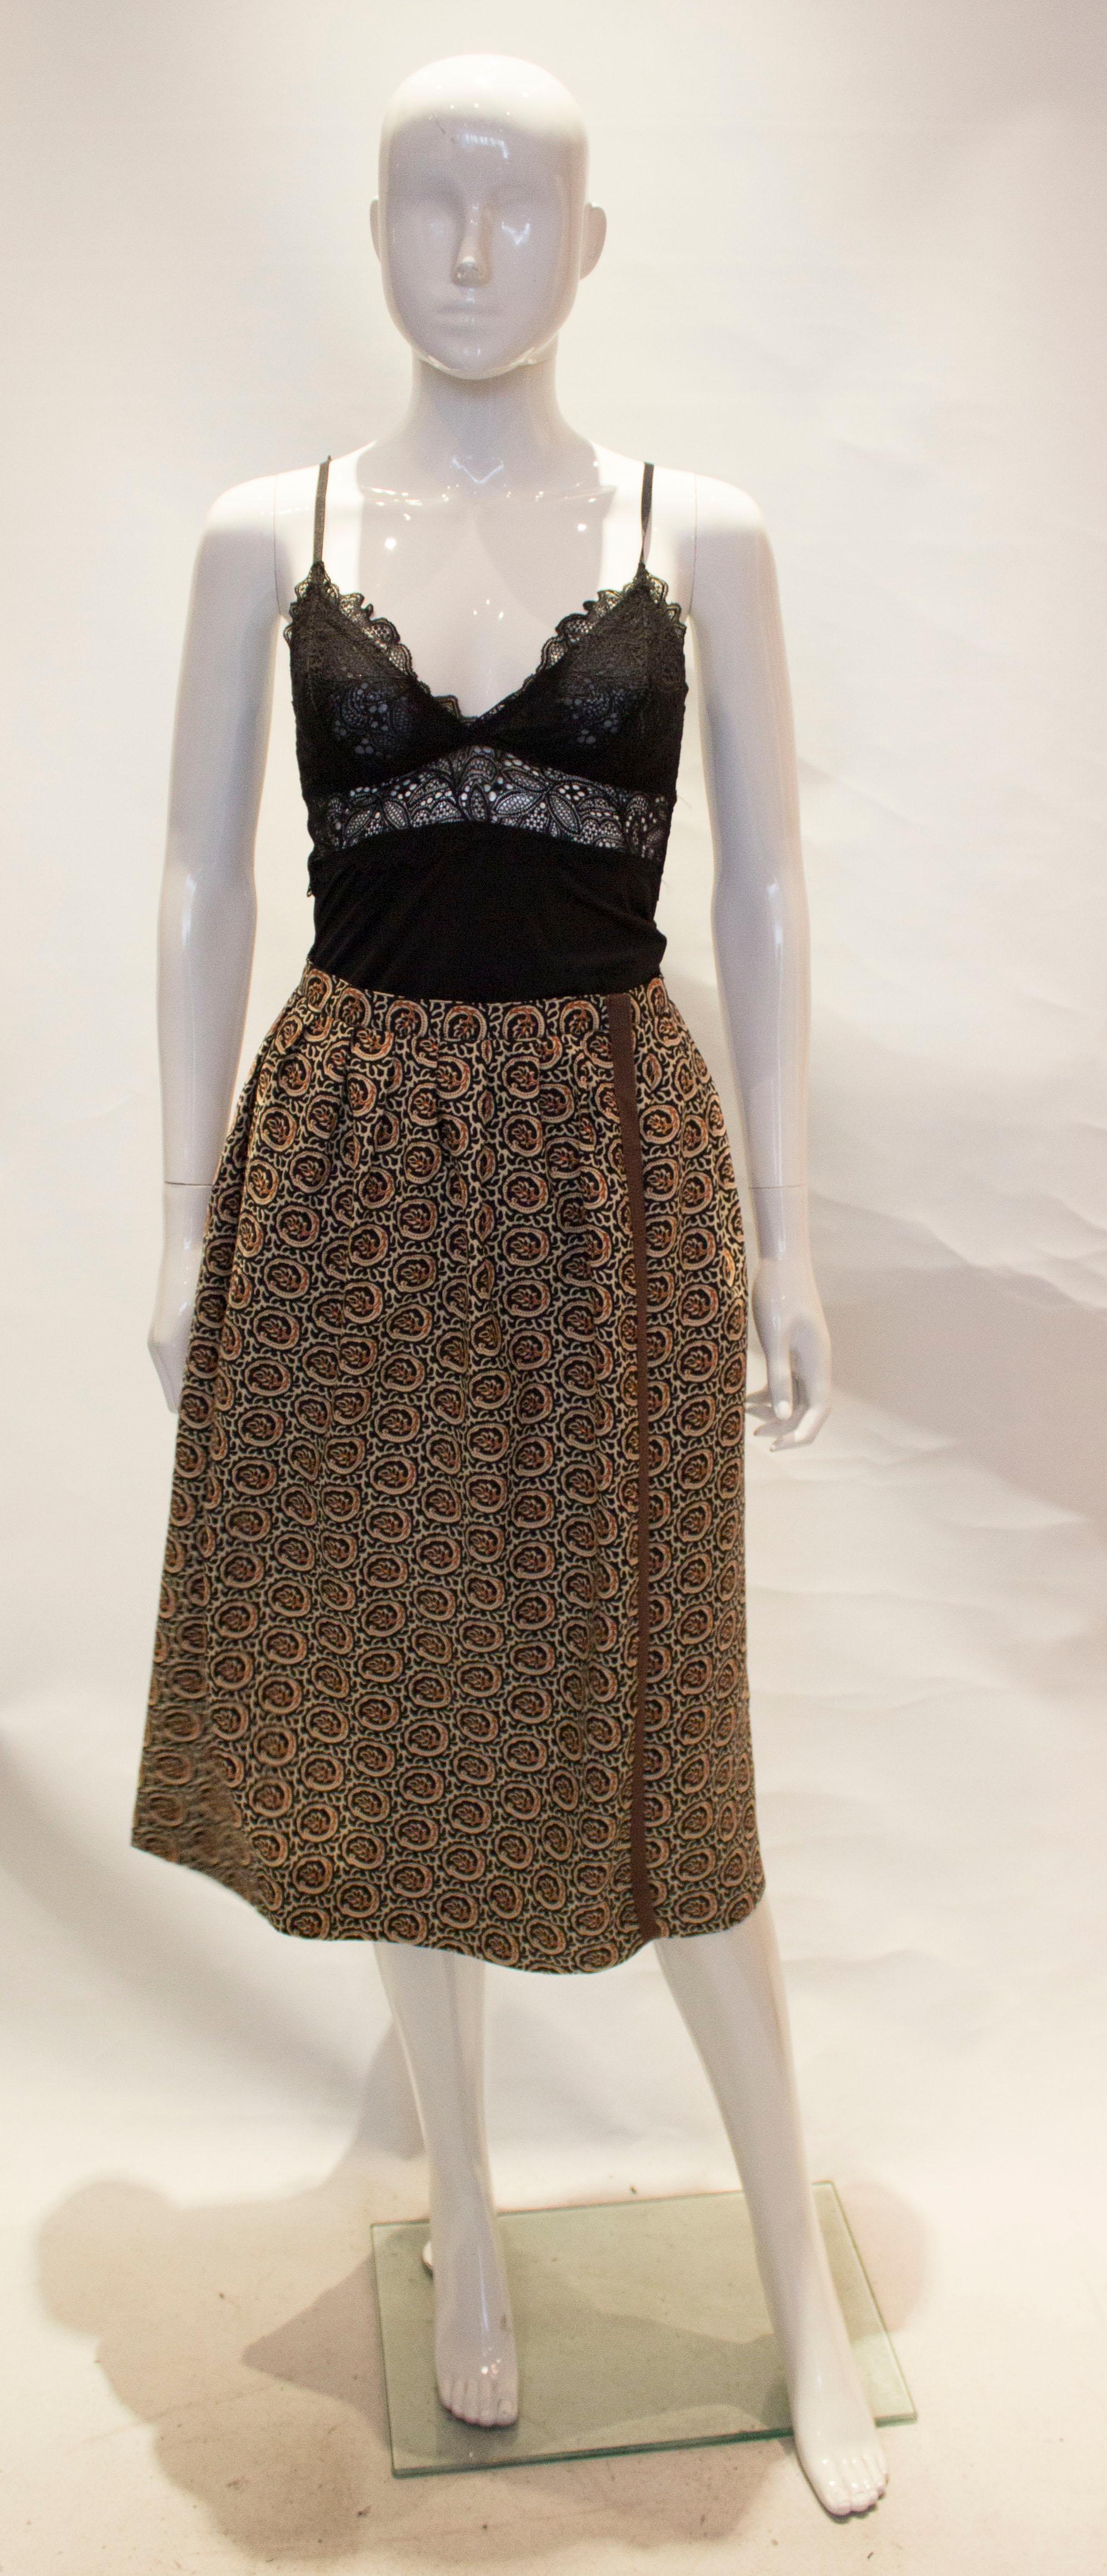 A great vintage skirt for Fall from Yves Saint Laurent., Rive Gauche line.